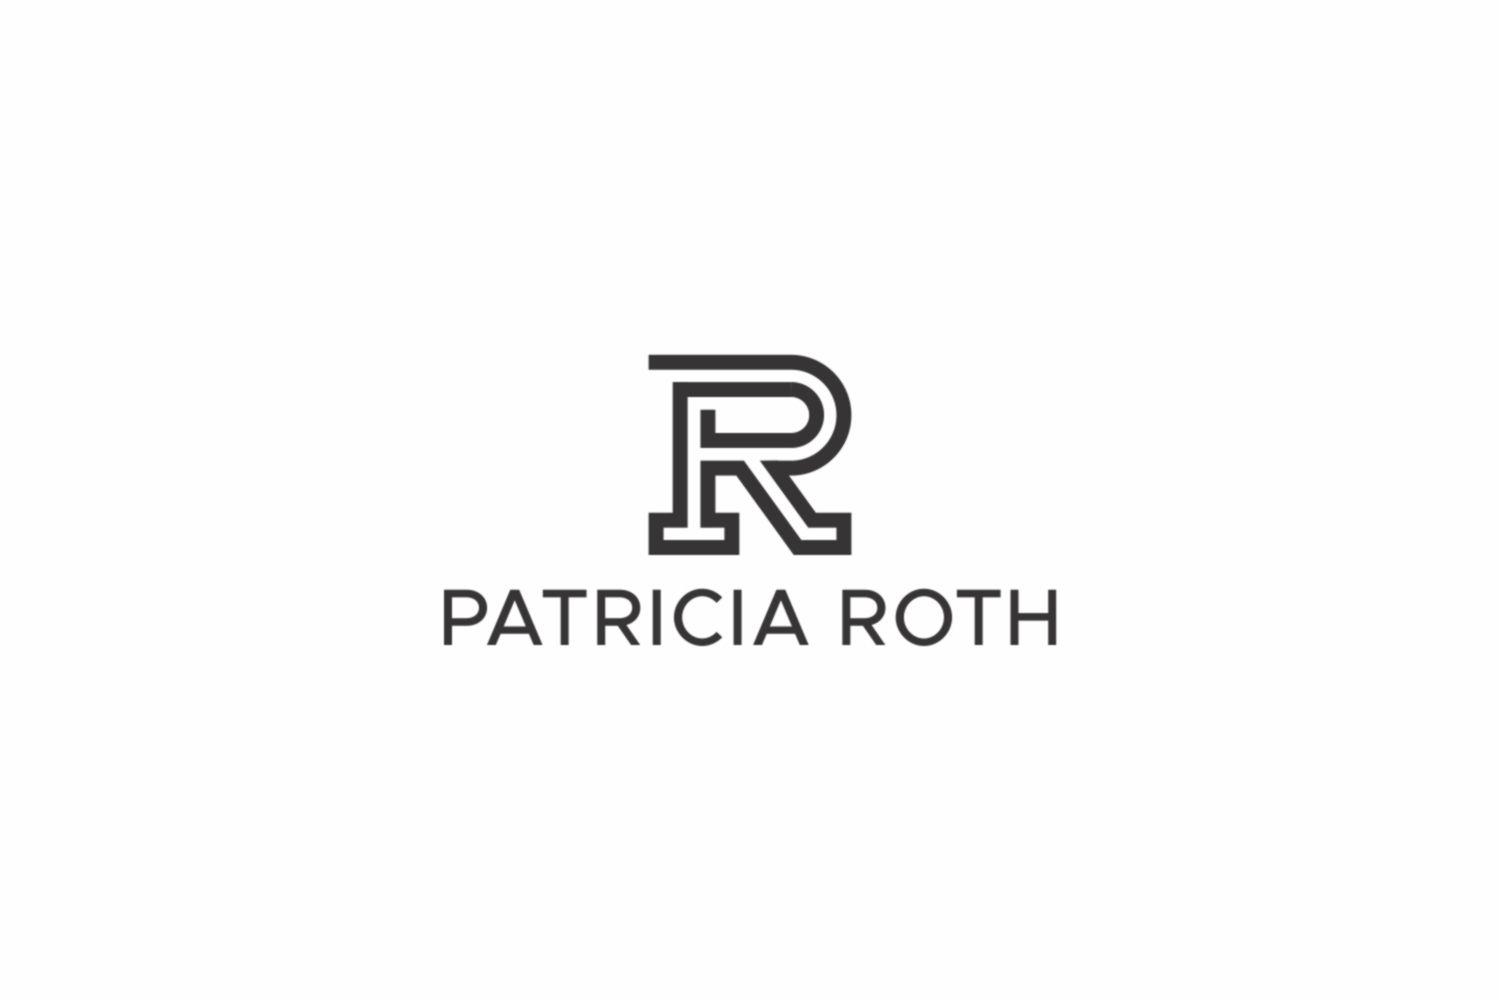 P and R Logo - Logo Design for I want two things in the logo. Patricia Roth and a ...